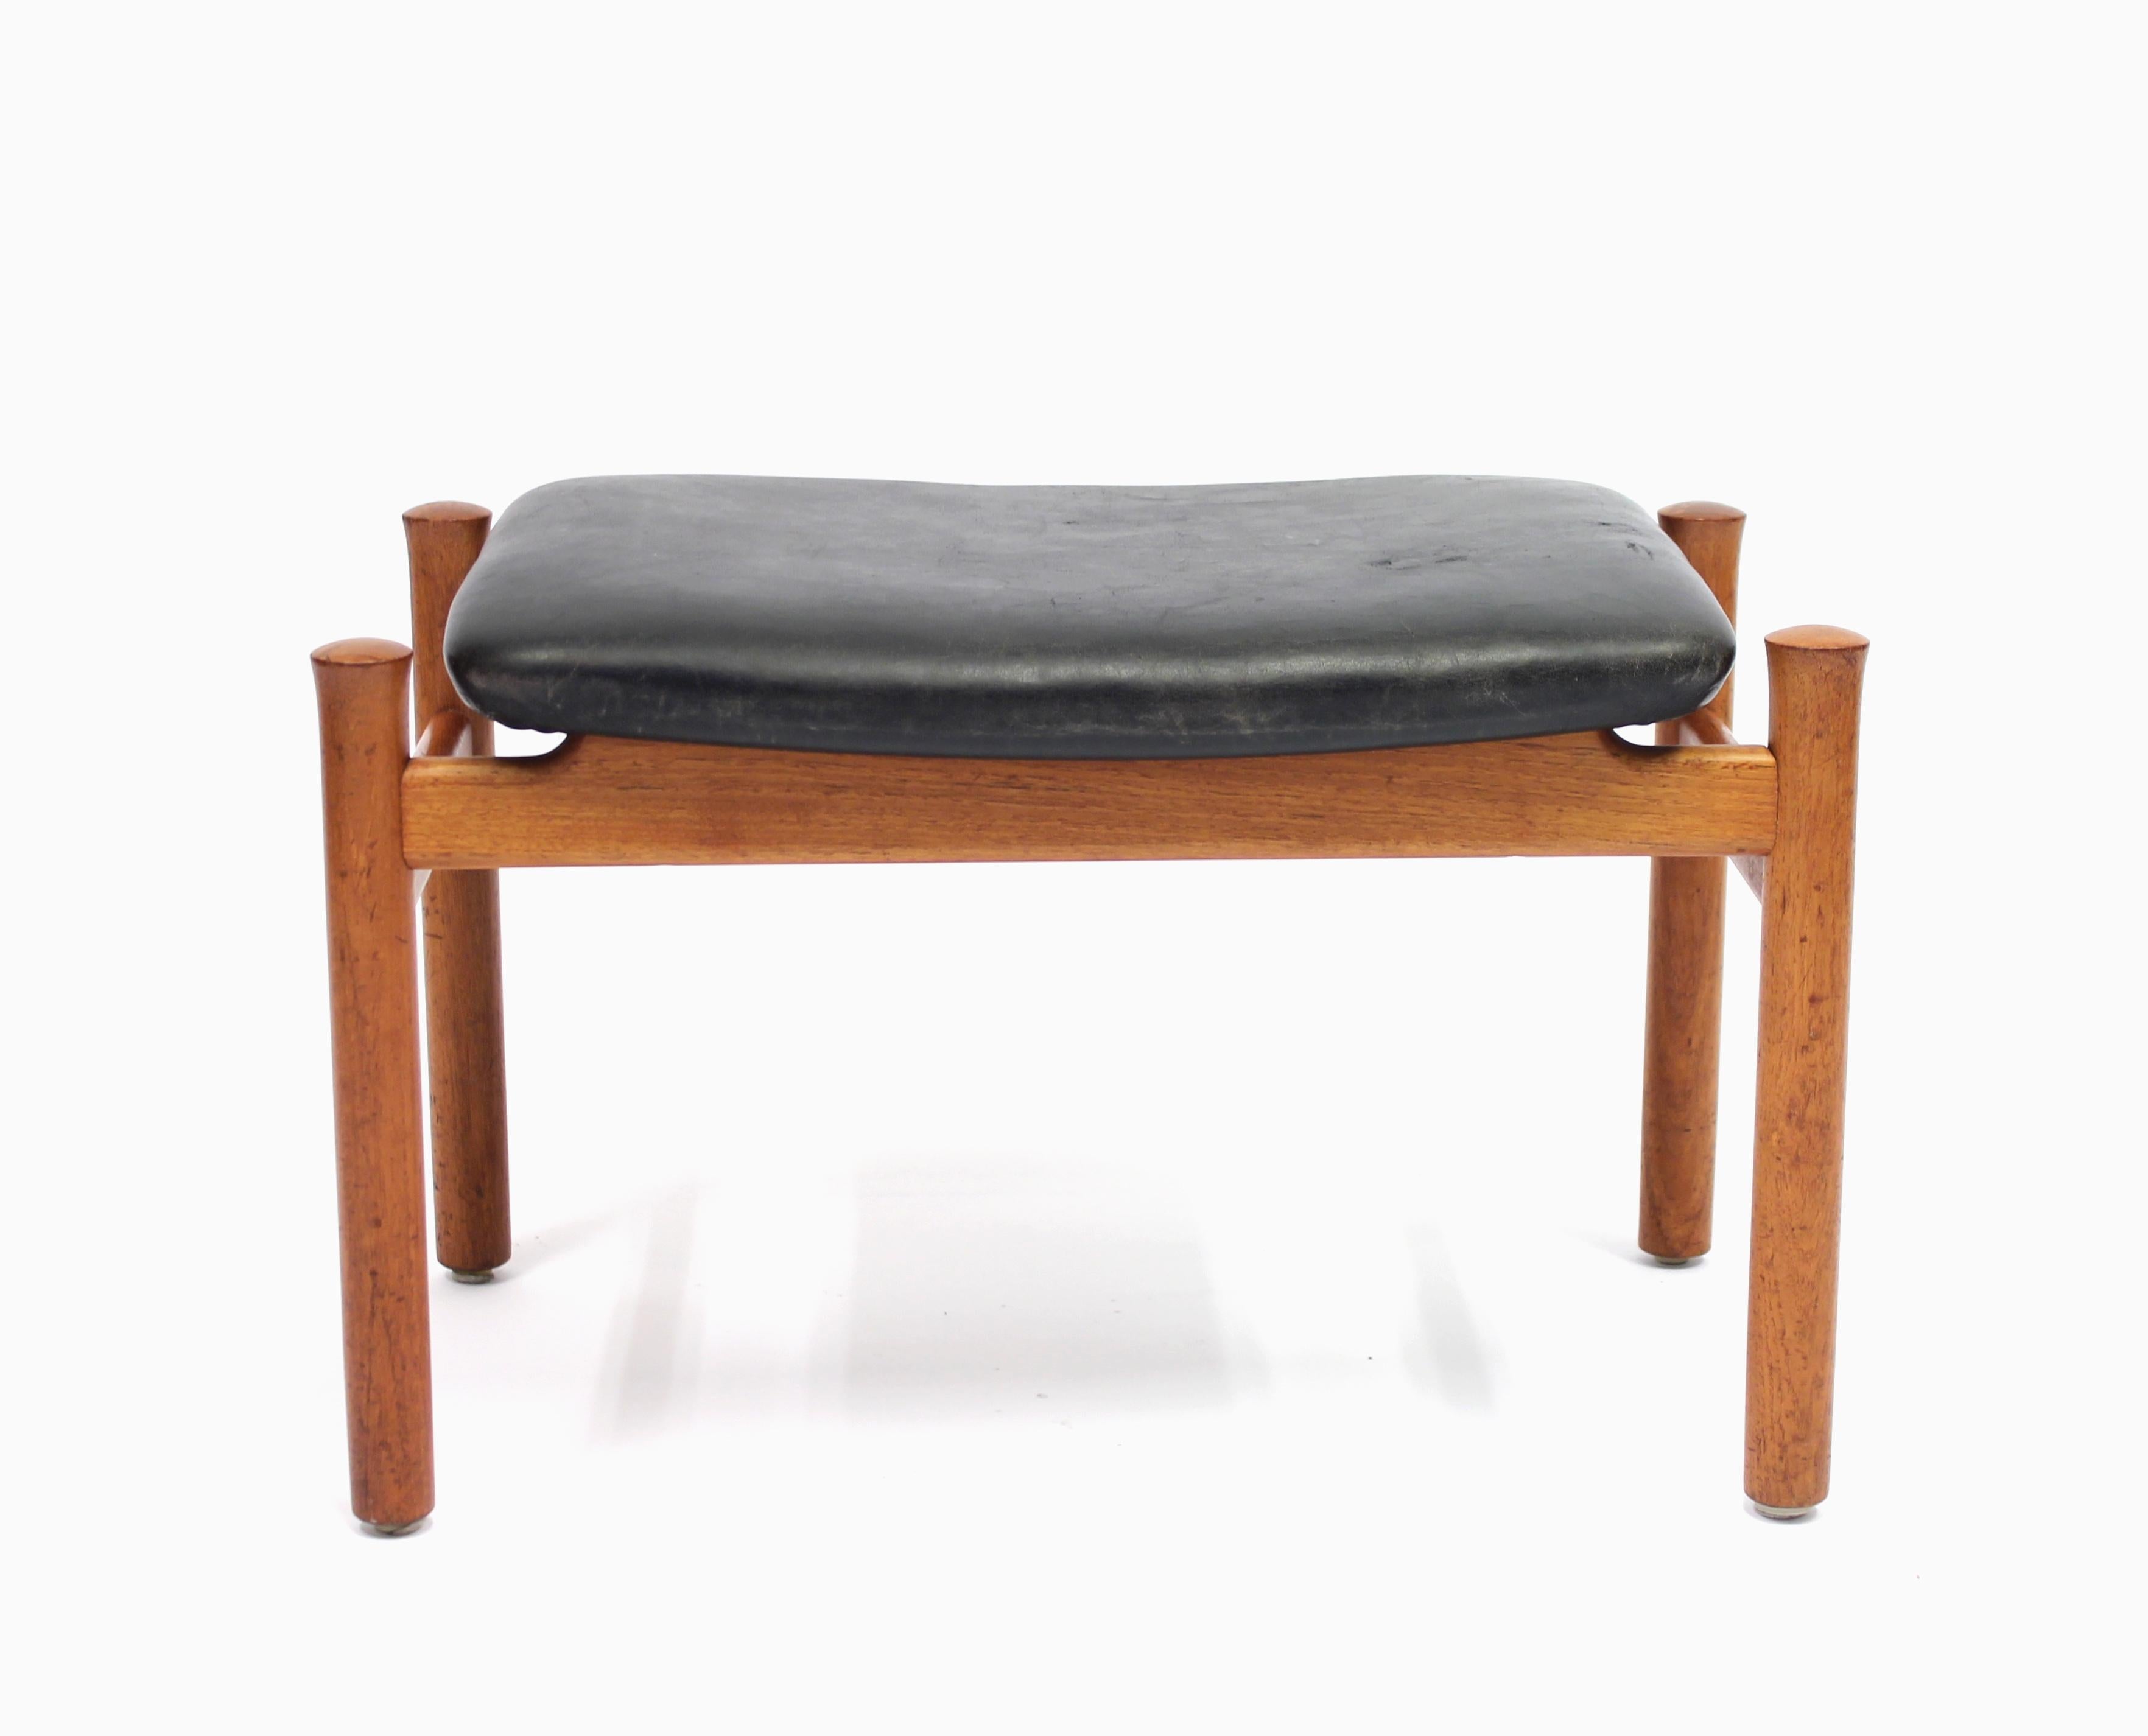 Stool / ottoman in teak and black leather designed by Søren Hansen for legendary Danish manufacturer Fritz Hansen in the 1960s. This example made in 1964. Untouched vintage condition with some ware consistent with age and use.